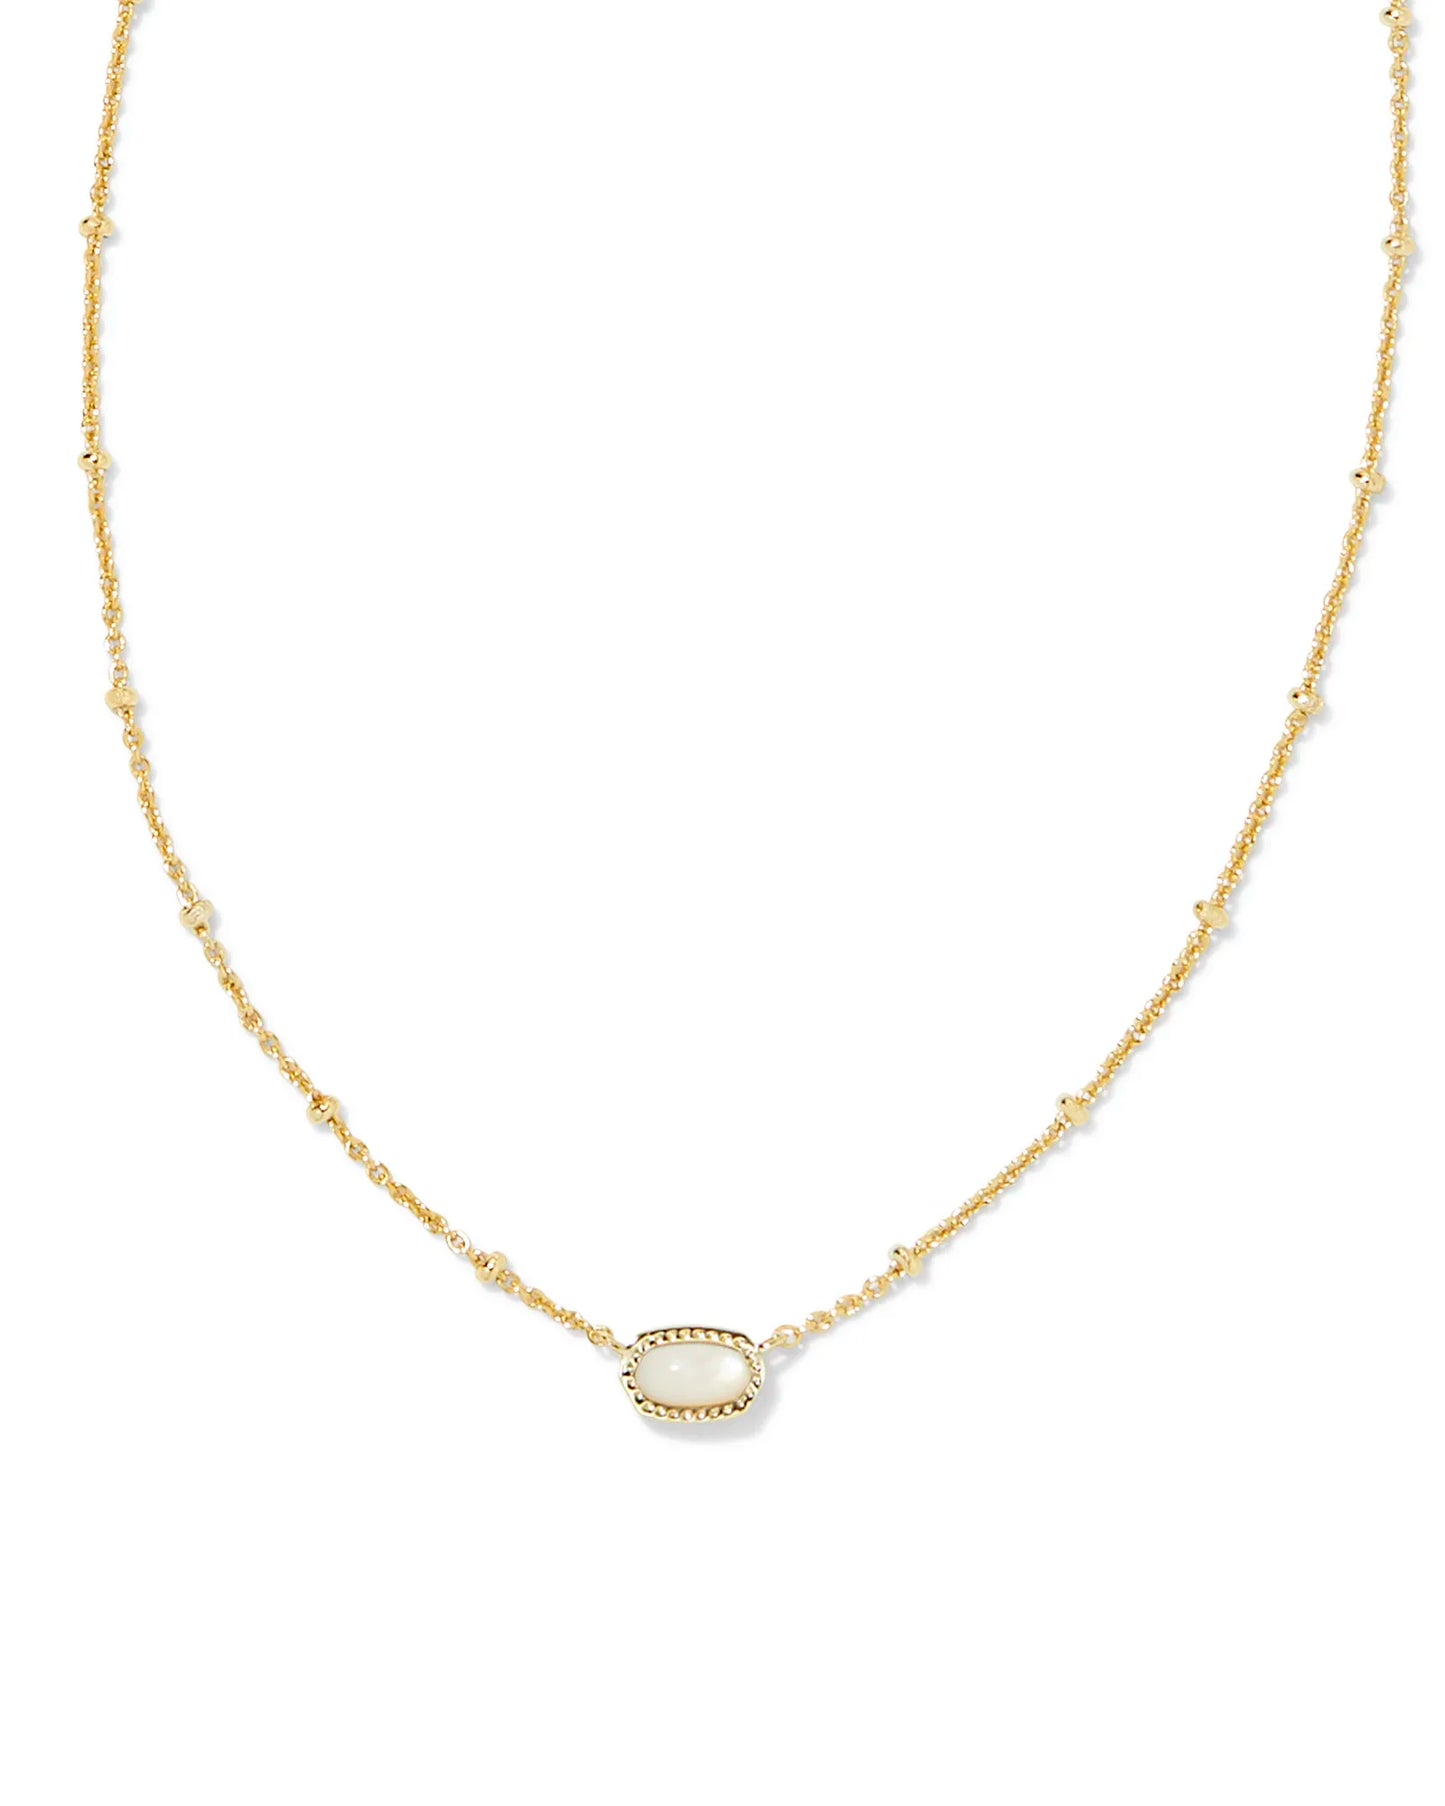 gold necklace with mini ivory mother of pearl stone